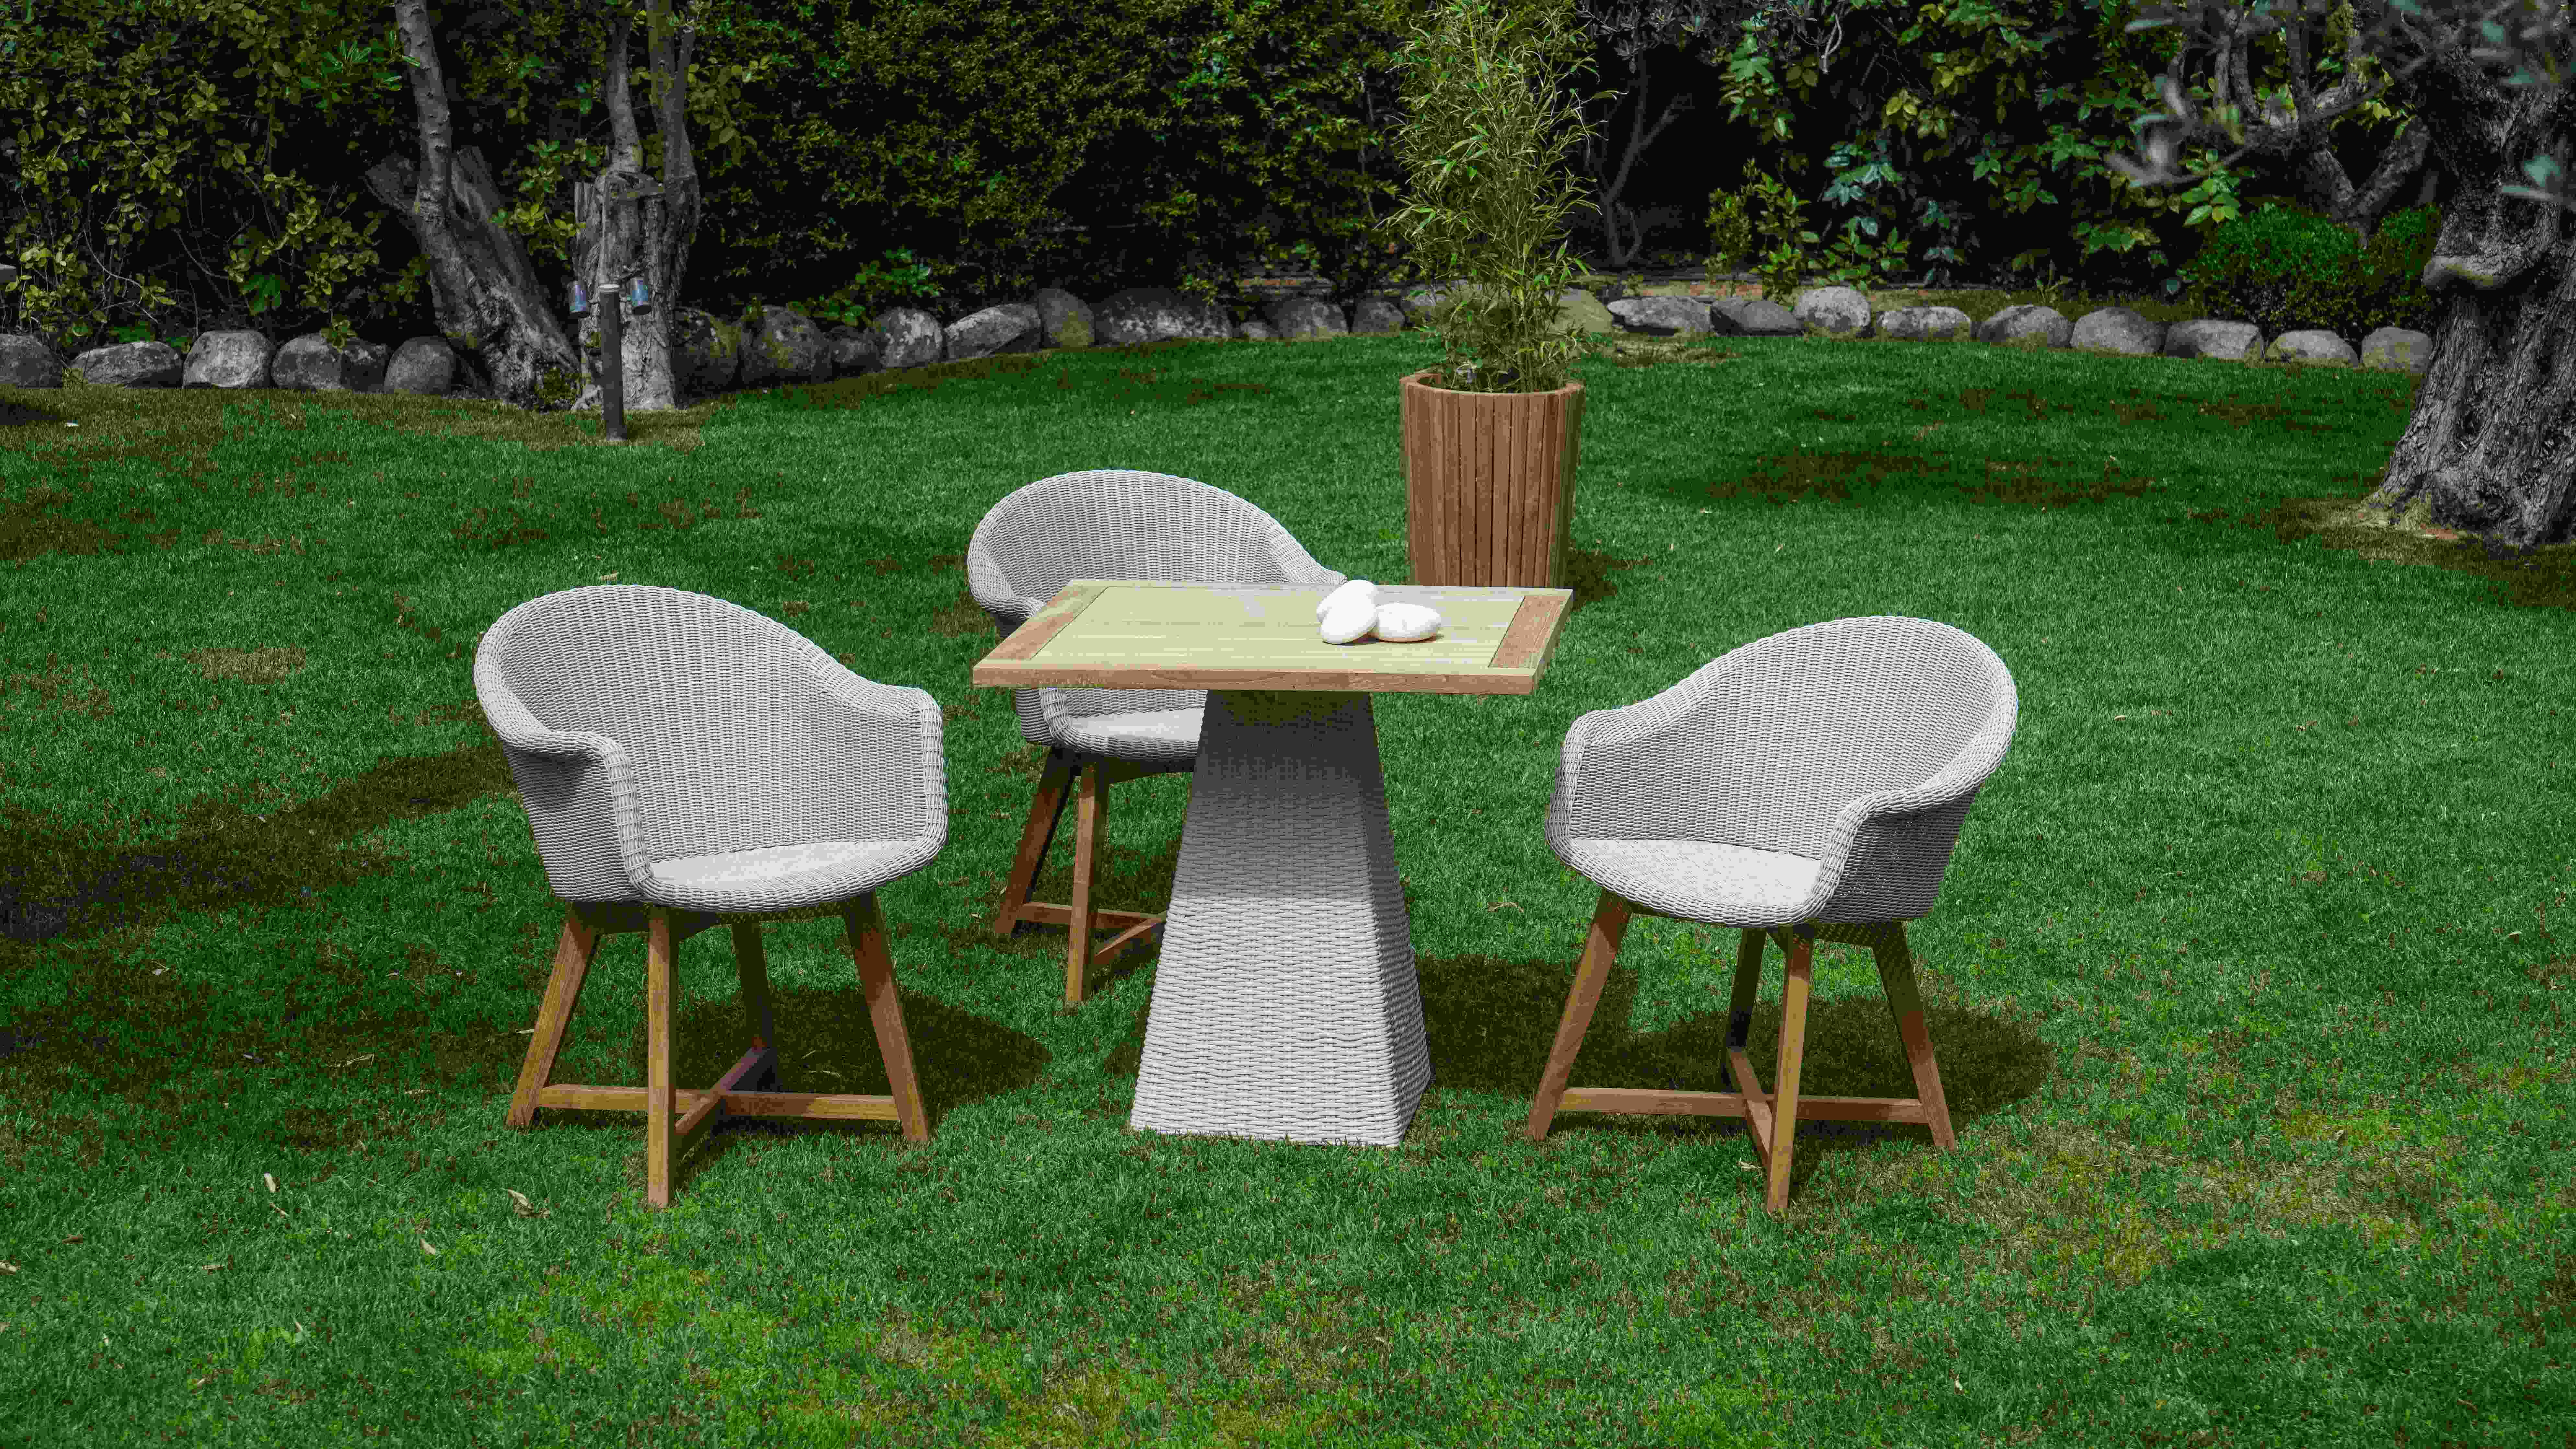 Gorgeous Backyard Collections Patio Furniture Extraordinary intended for proportions 7952 X 4472